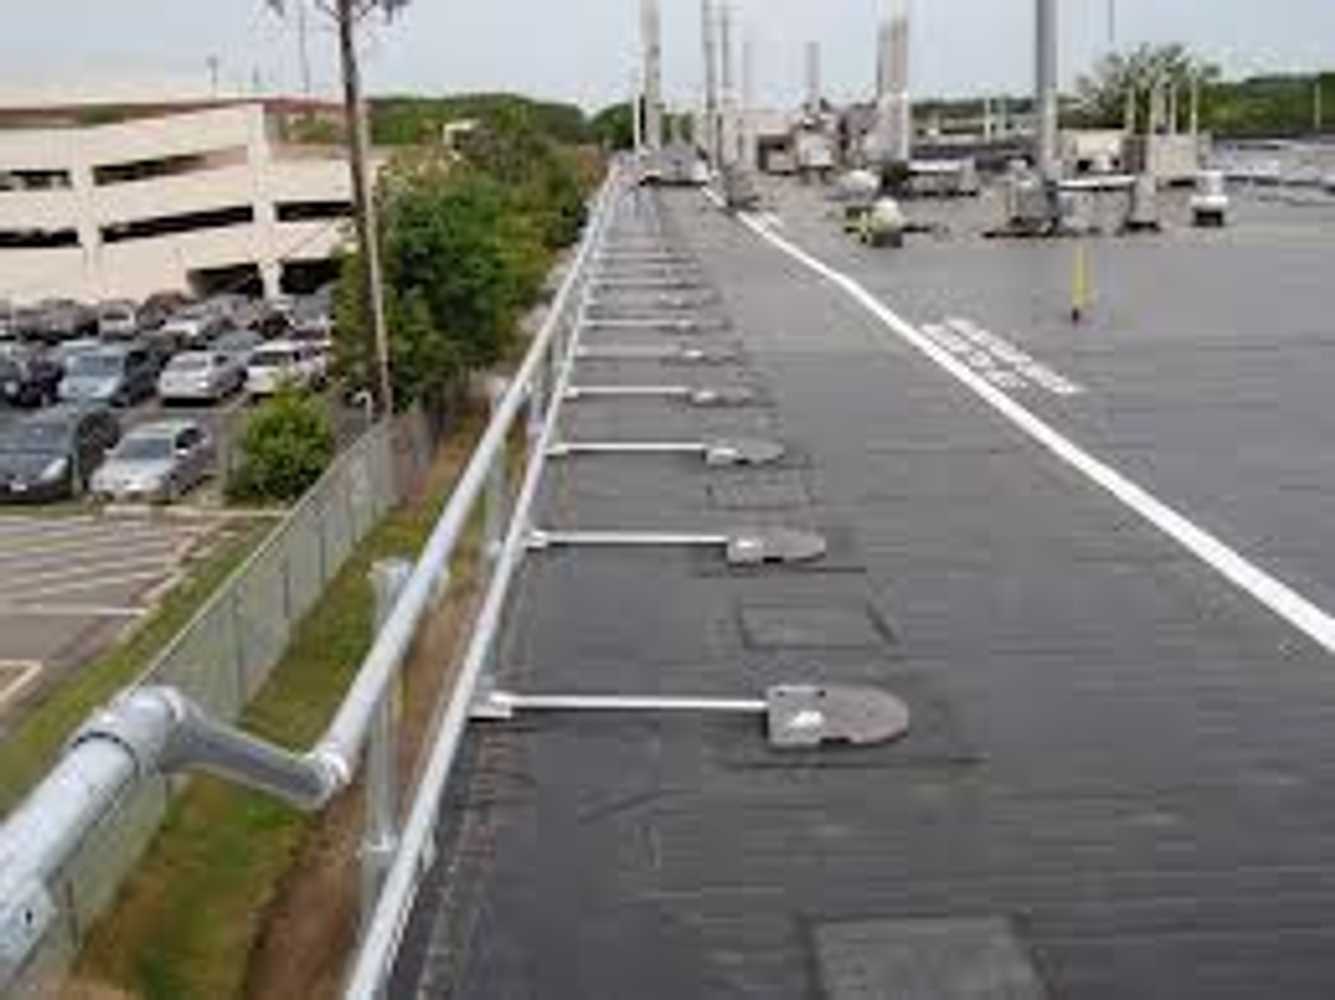 Photos from Commercial Industrial Roofing, LLC